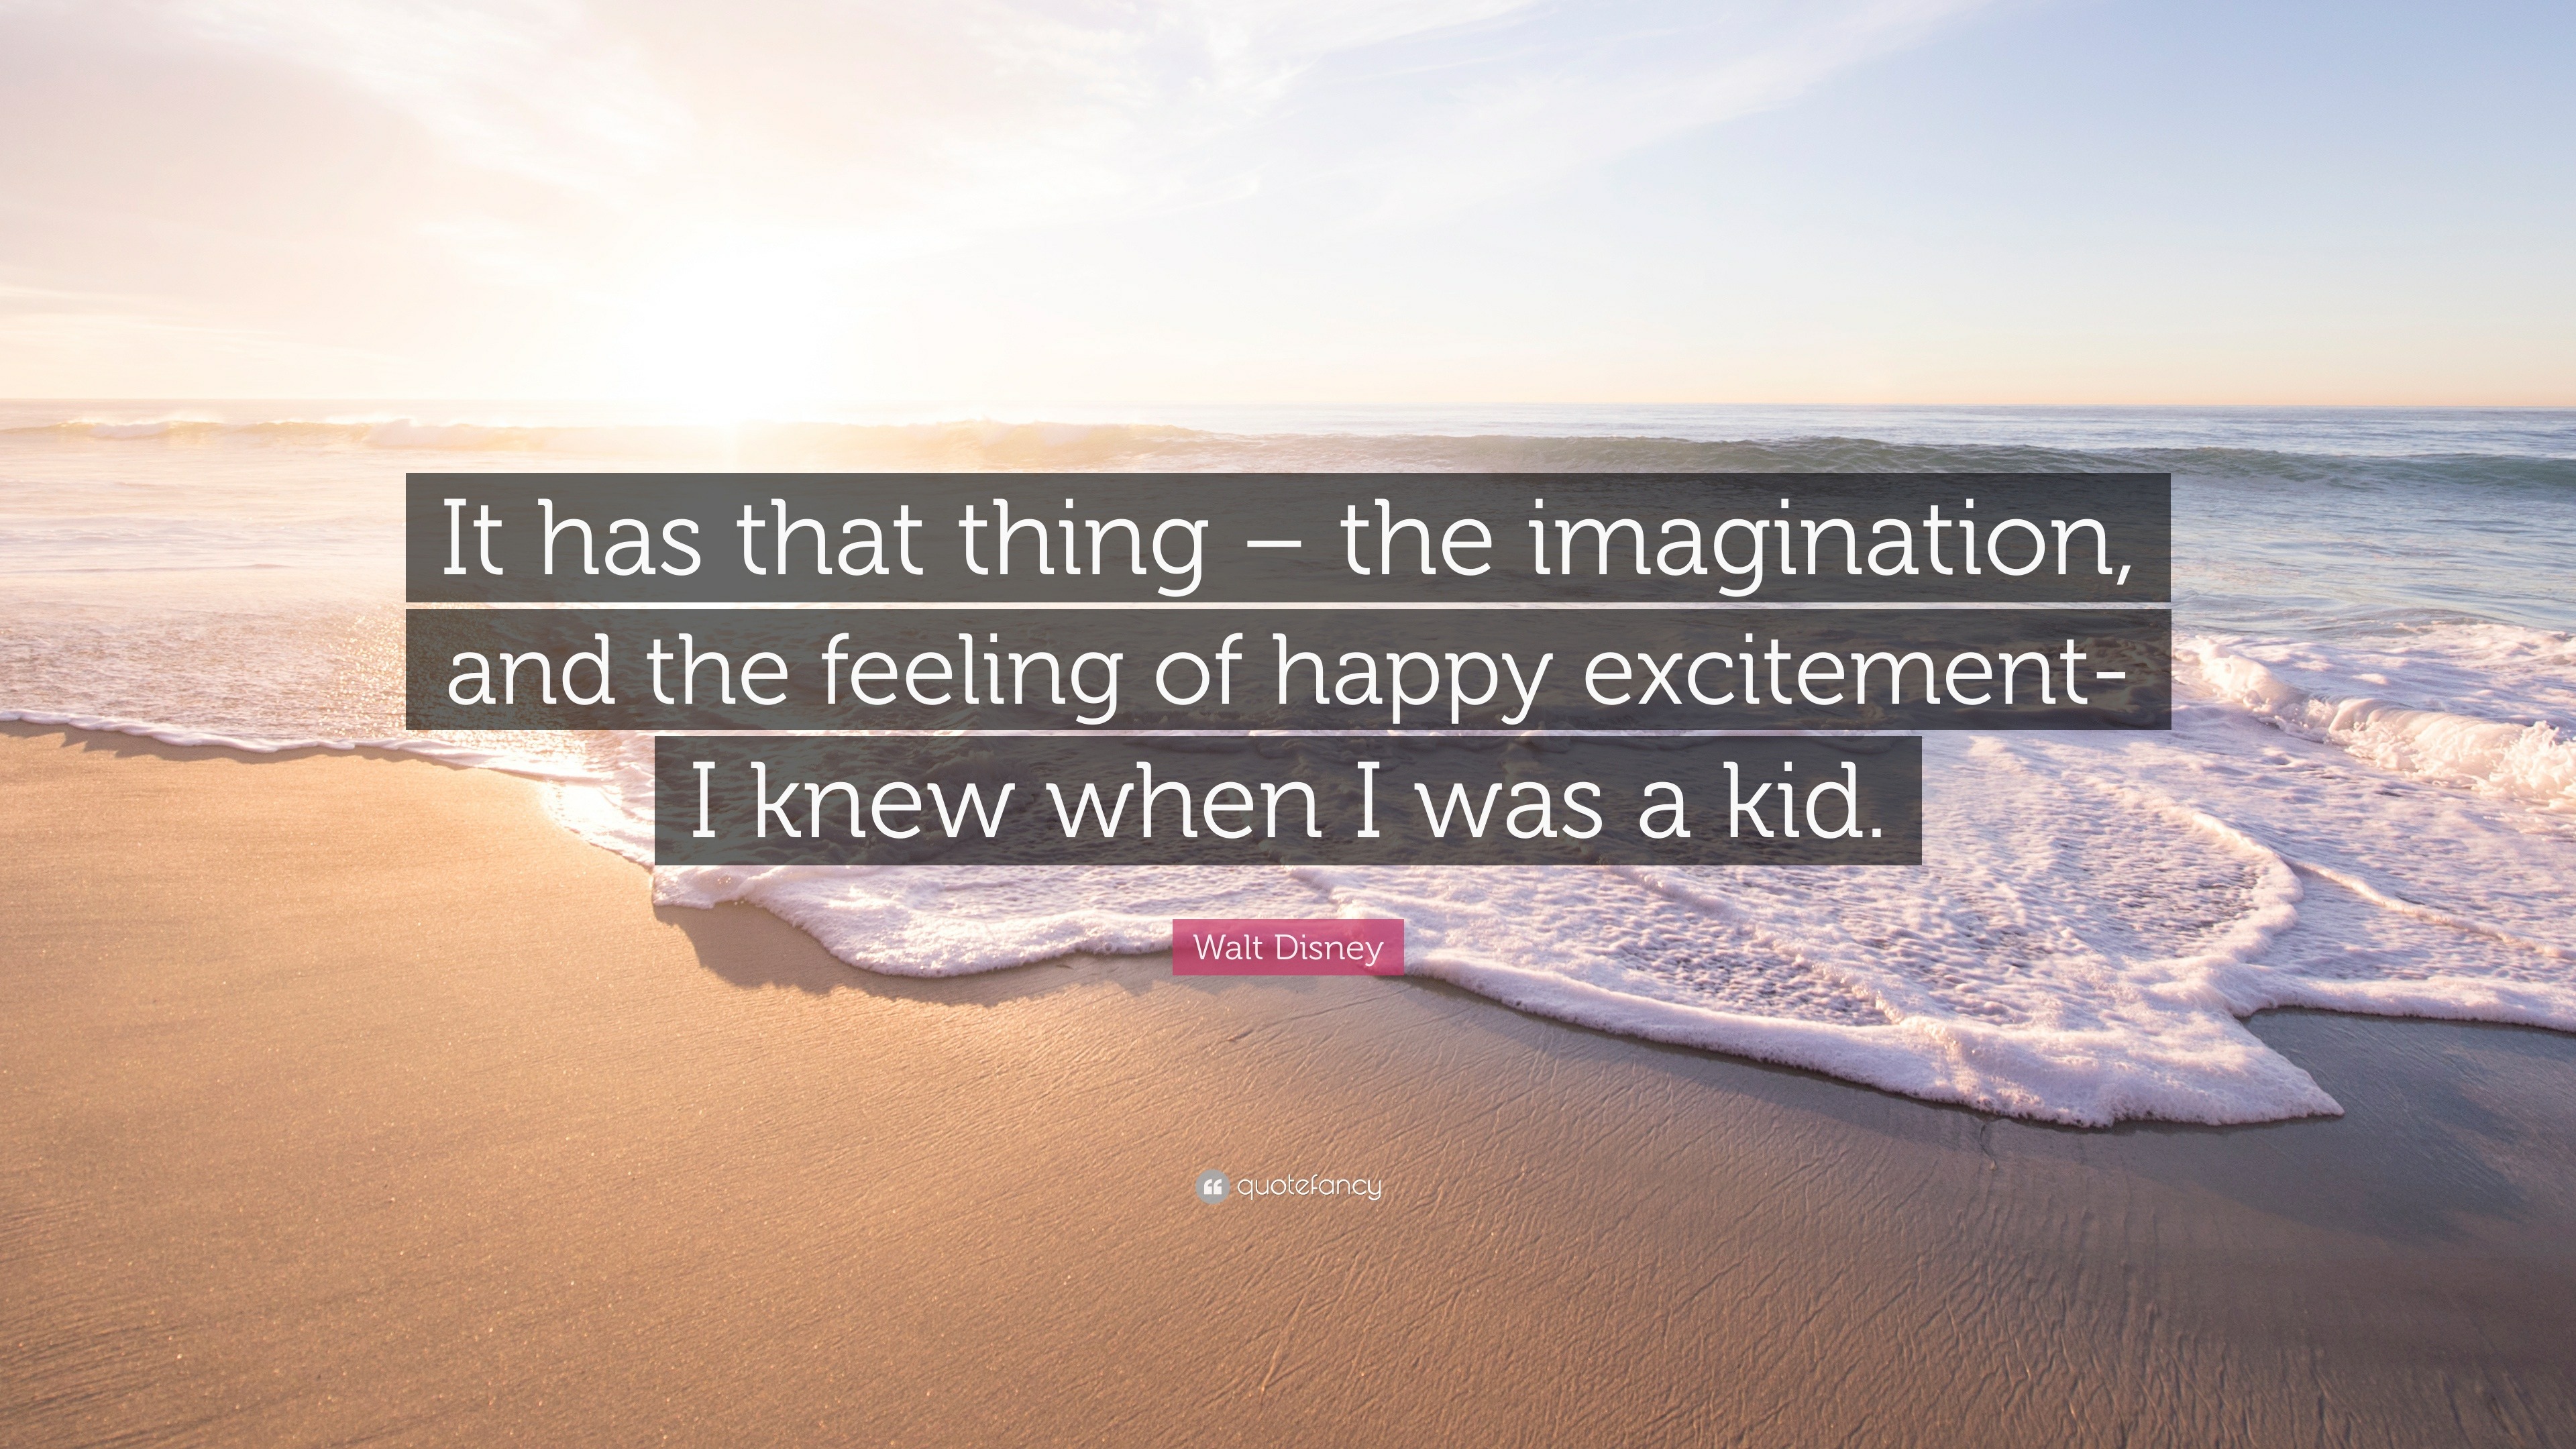 Walt Disney Quote: “It has that thing – the imagination, and the